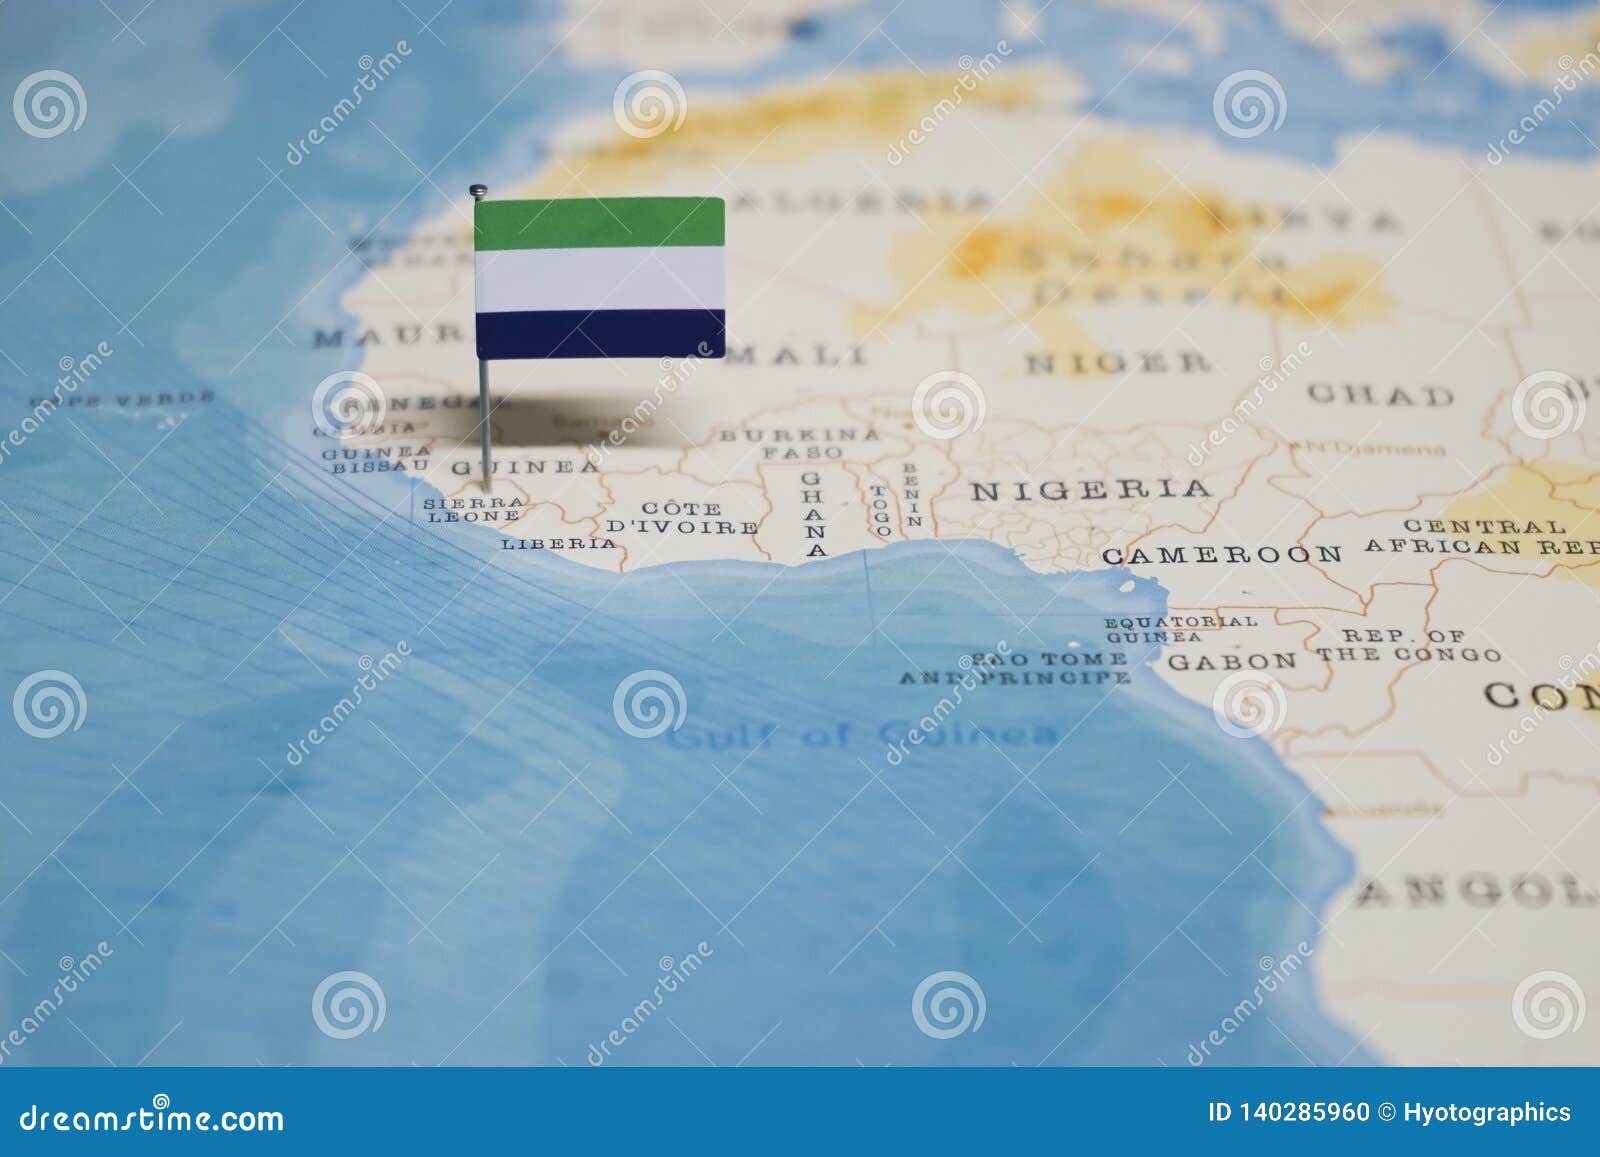 the flag of sierra leone in the world map